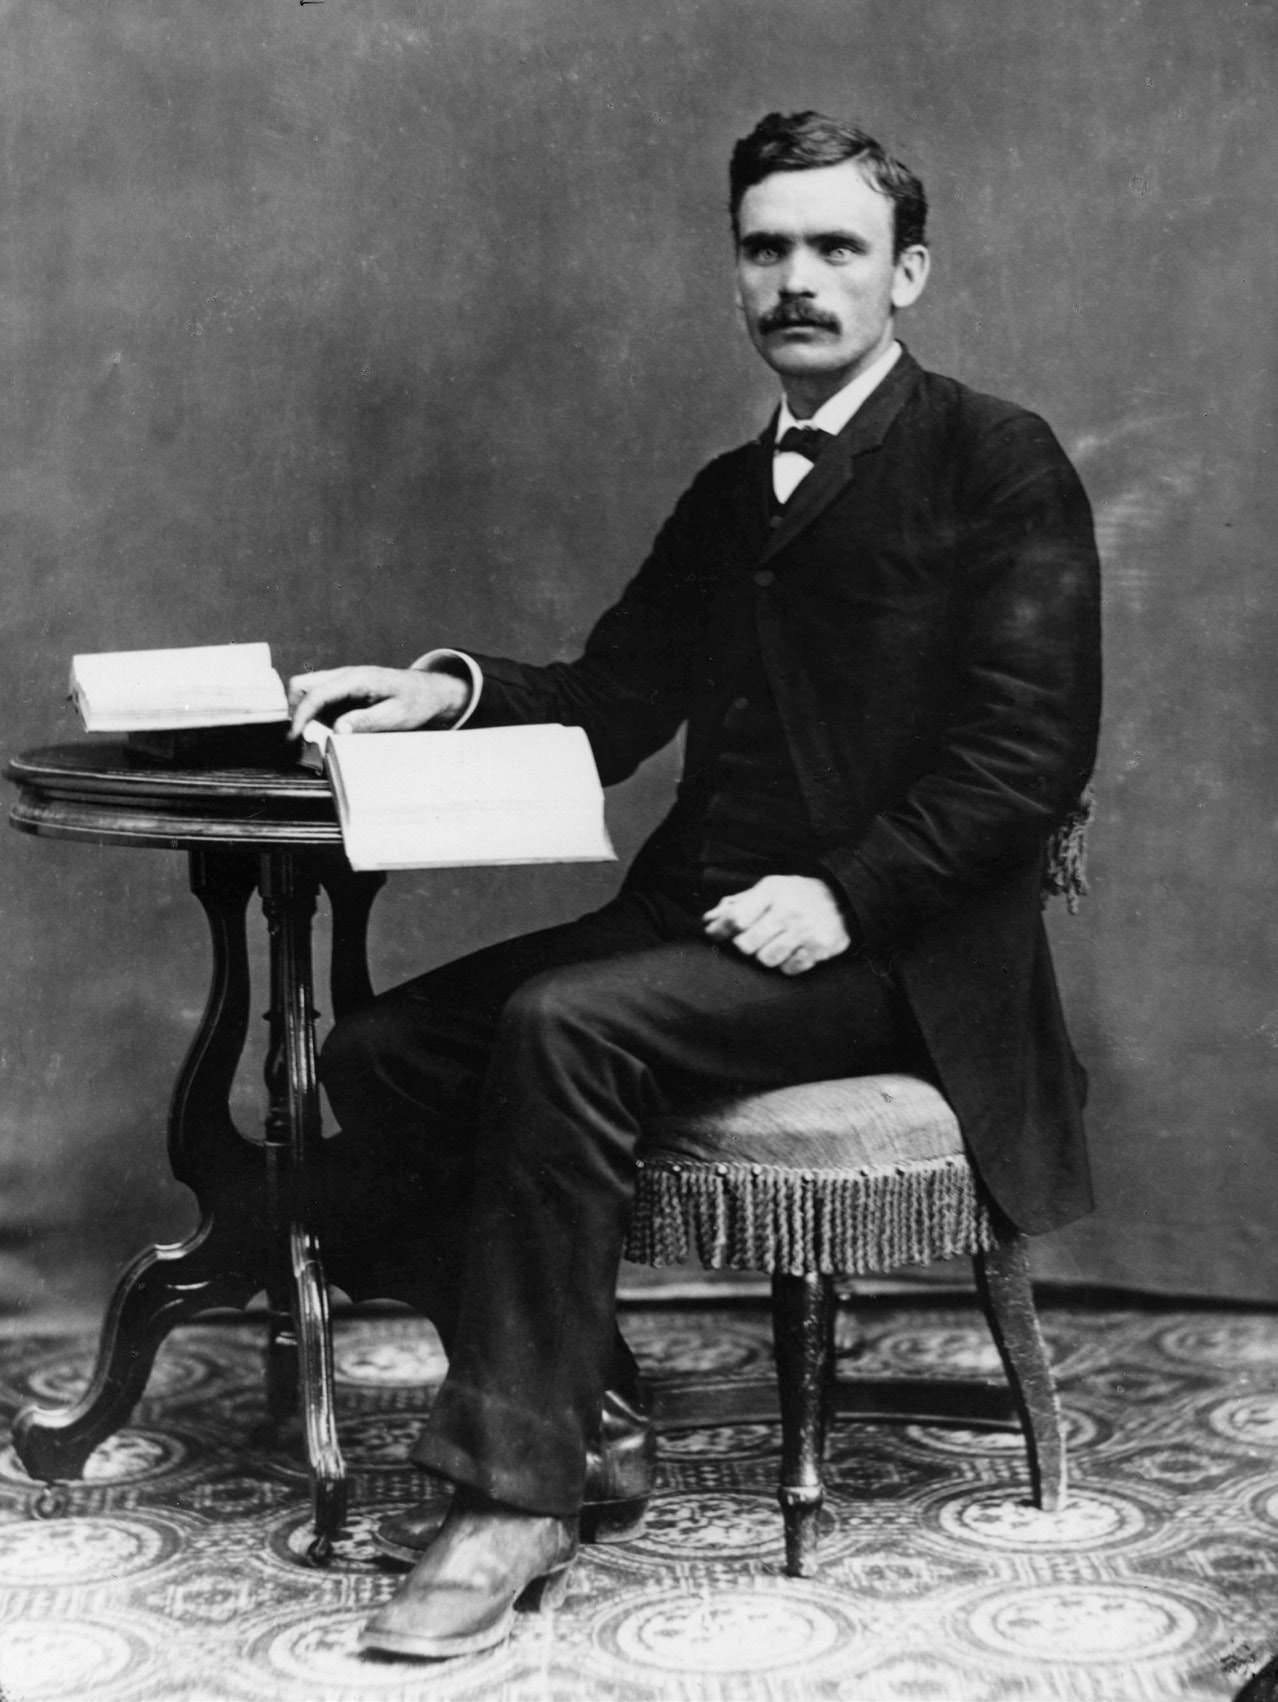 A photograph portrait of Brigham Henry (B. H.)  Roberts sitting to study some books sometime in the late 1800s.